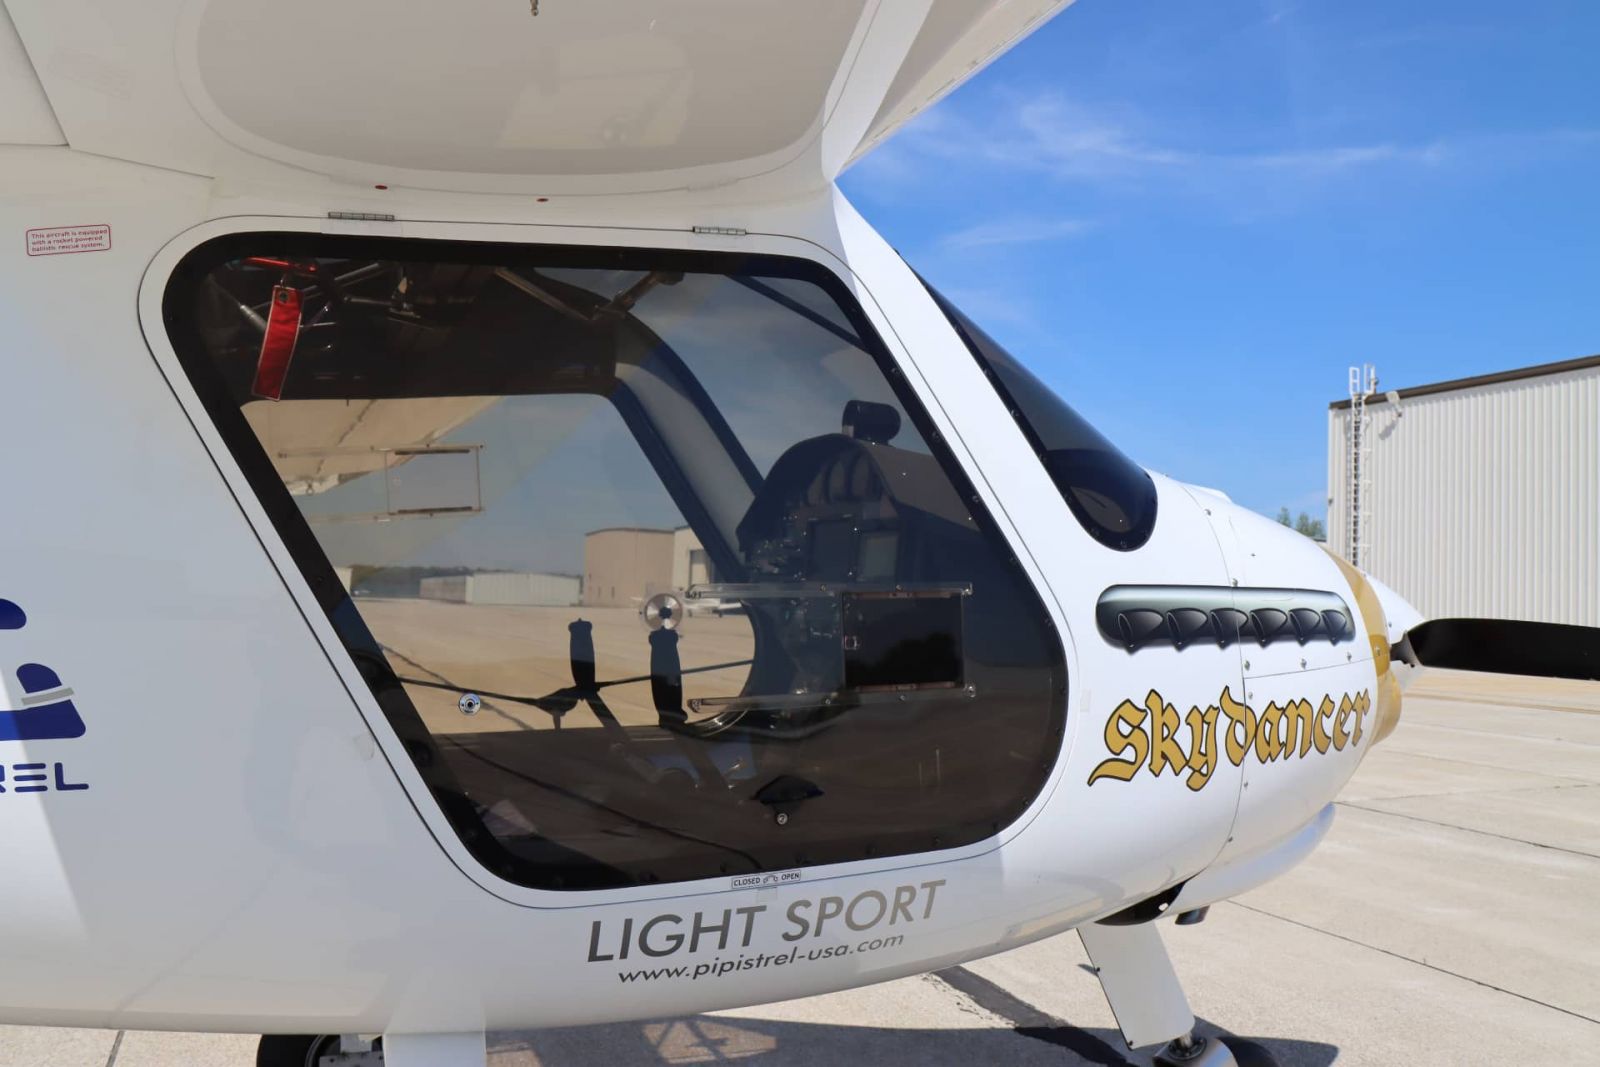 The Pipistrel Sinus aircraft features a side-by-side seating arrangement, which acommodated the training of a deaf student who needed to easily communicate with the flight instructor. (Purdue University photo/John O'Malley)